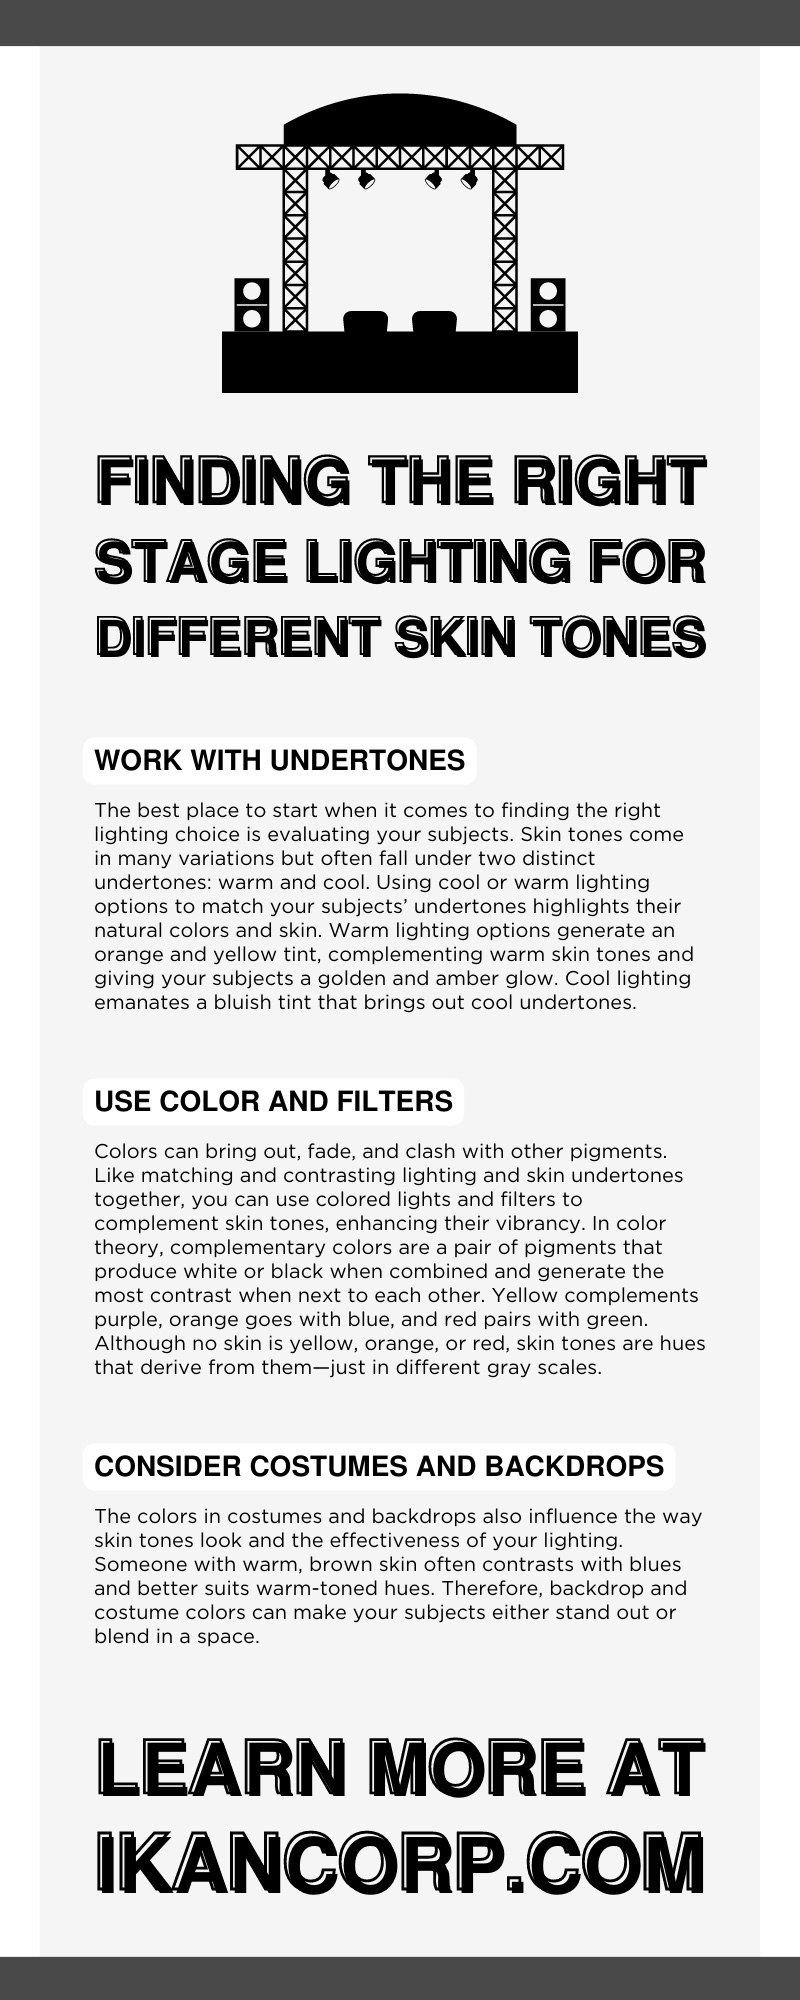 Finding the Right Stage Lighting for Different Skin Tones